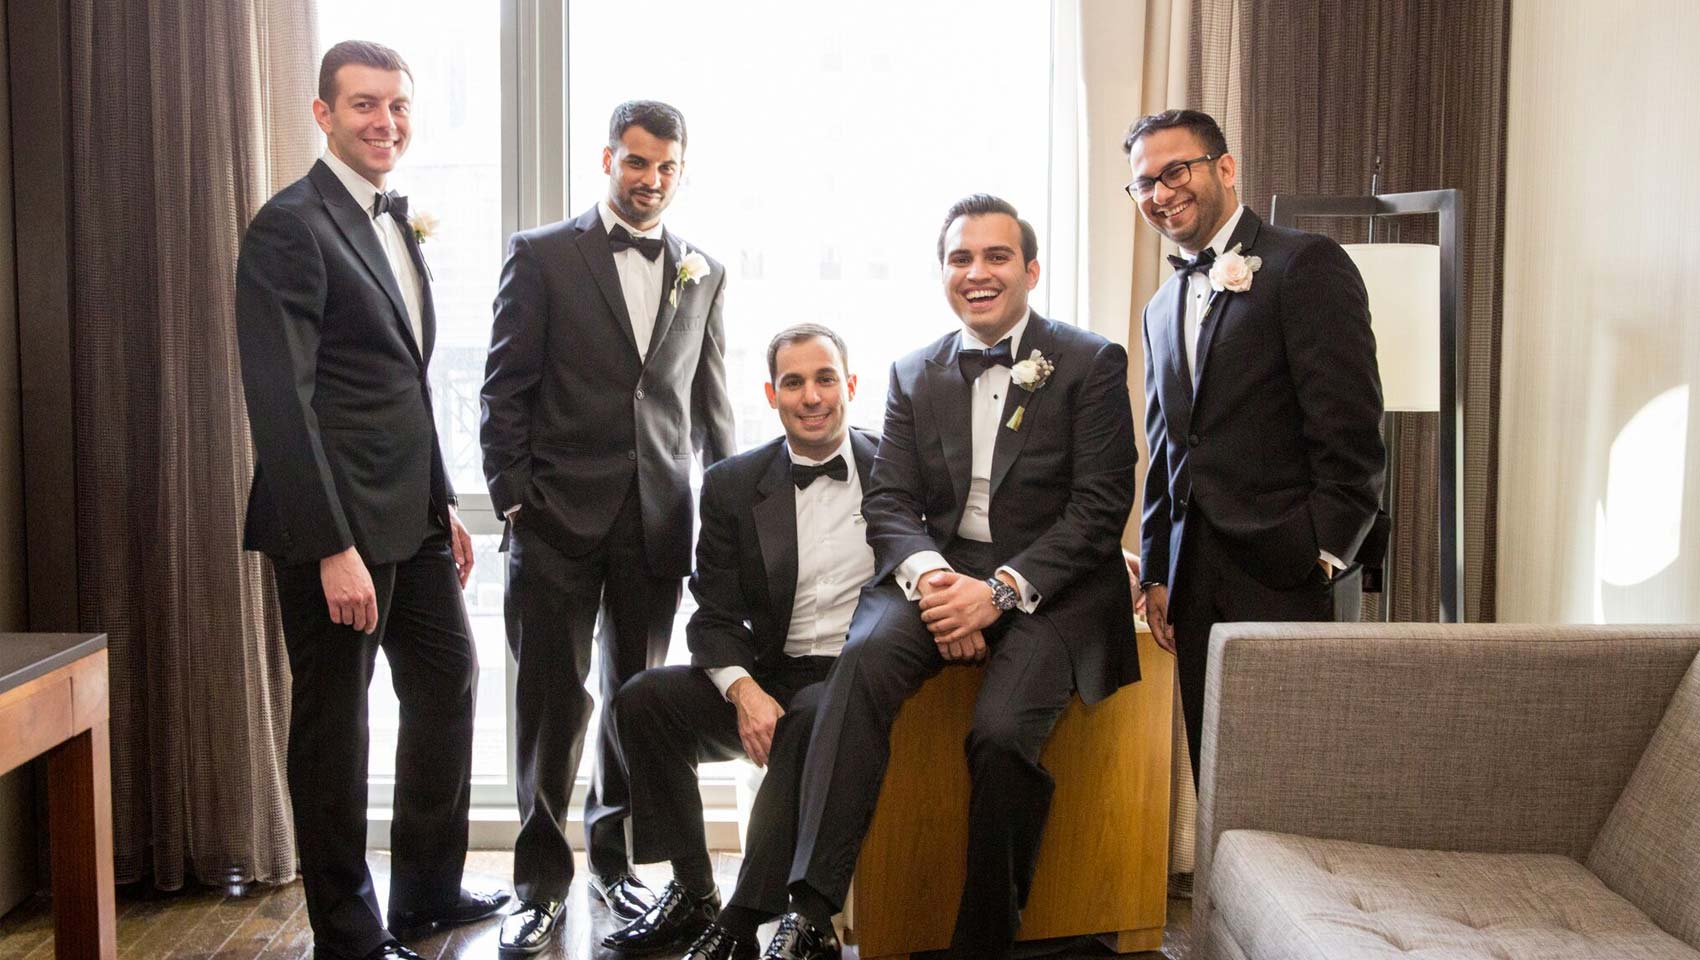 Groomsmen with Ravi all dressed in tuxedos for Ravi's wedding day